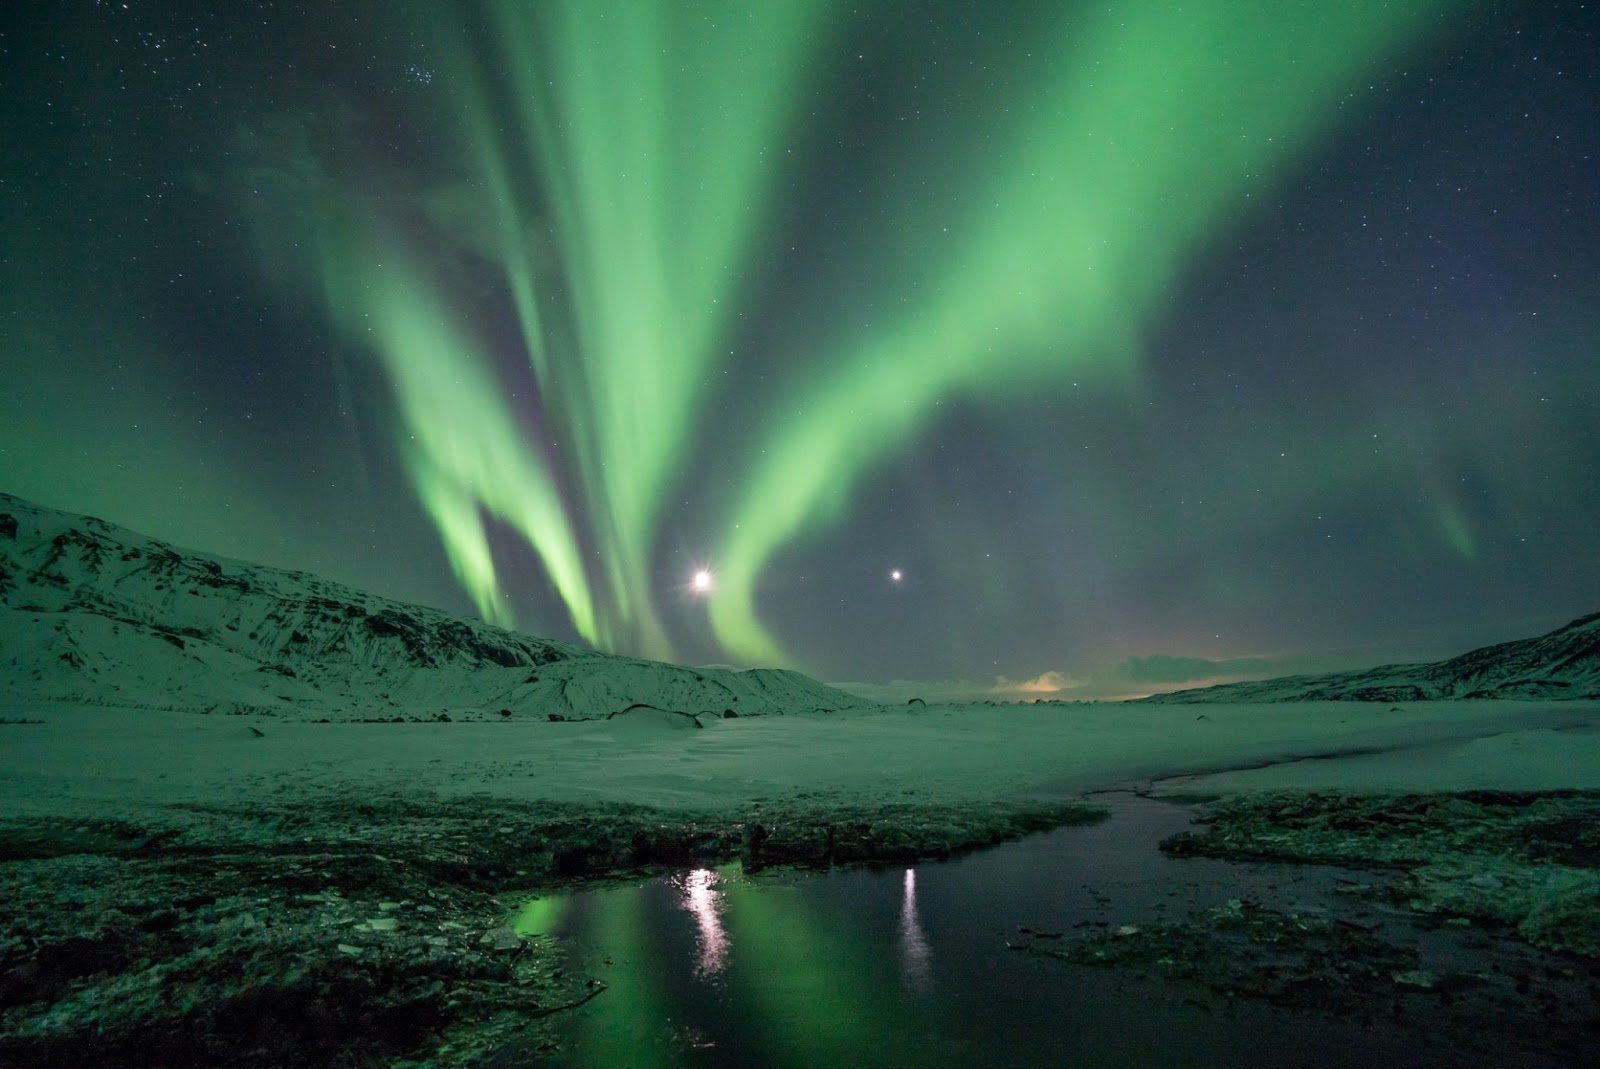 The Northern lights 